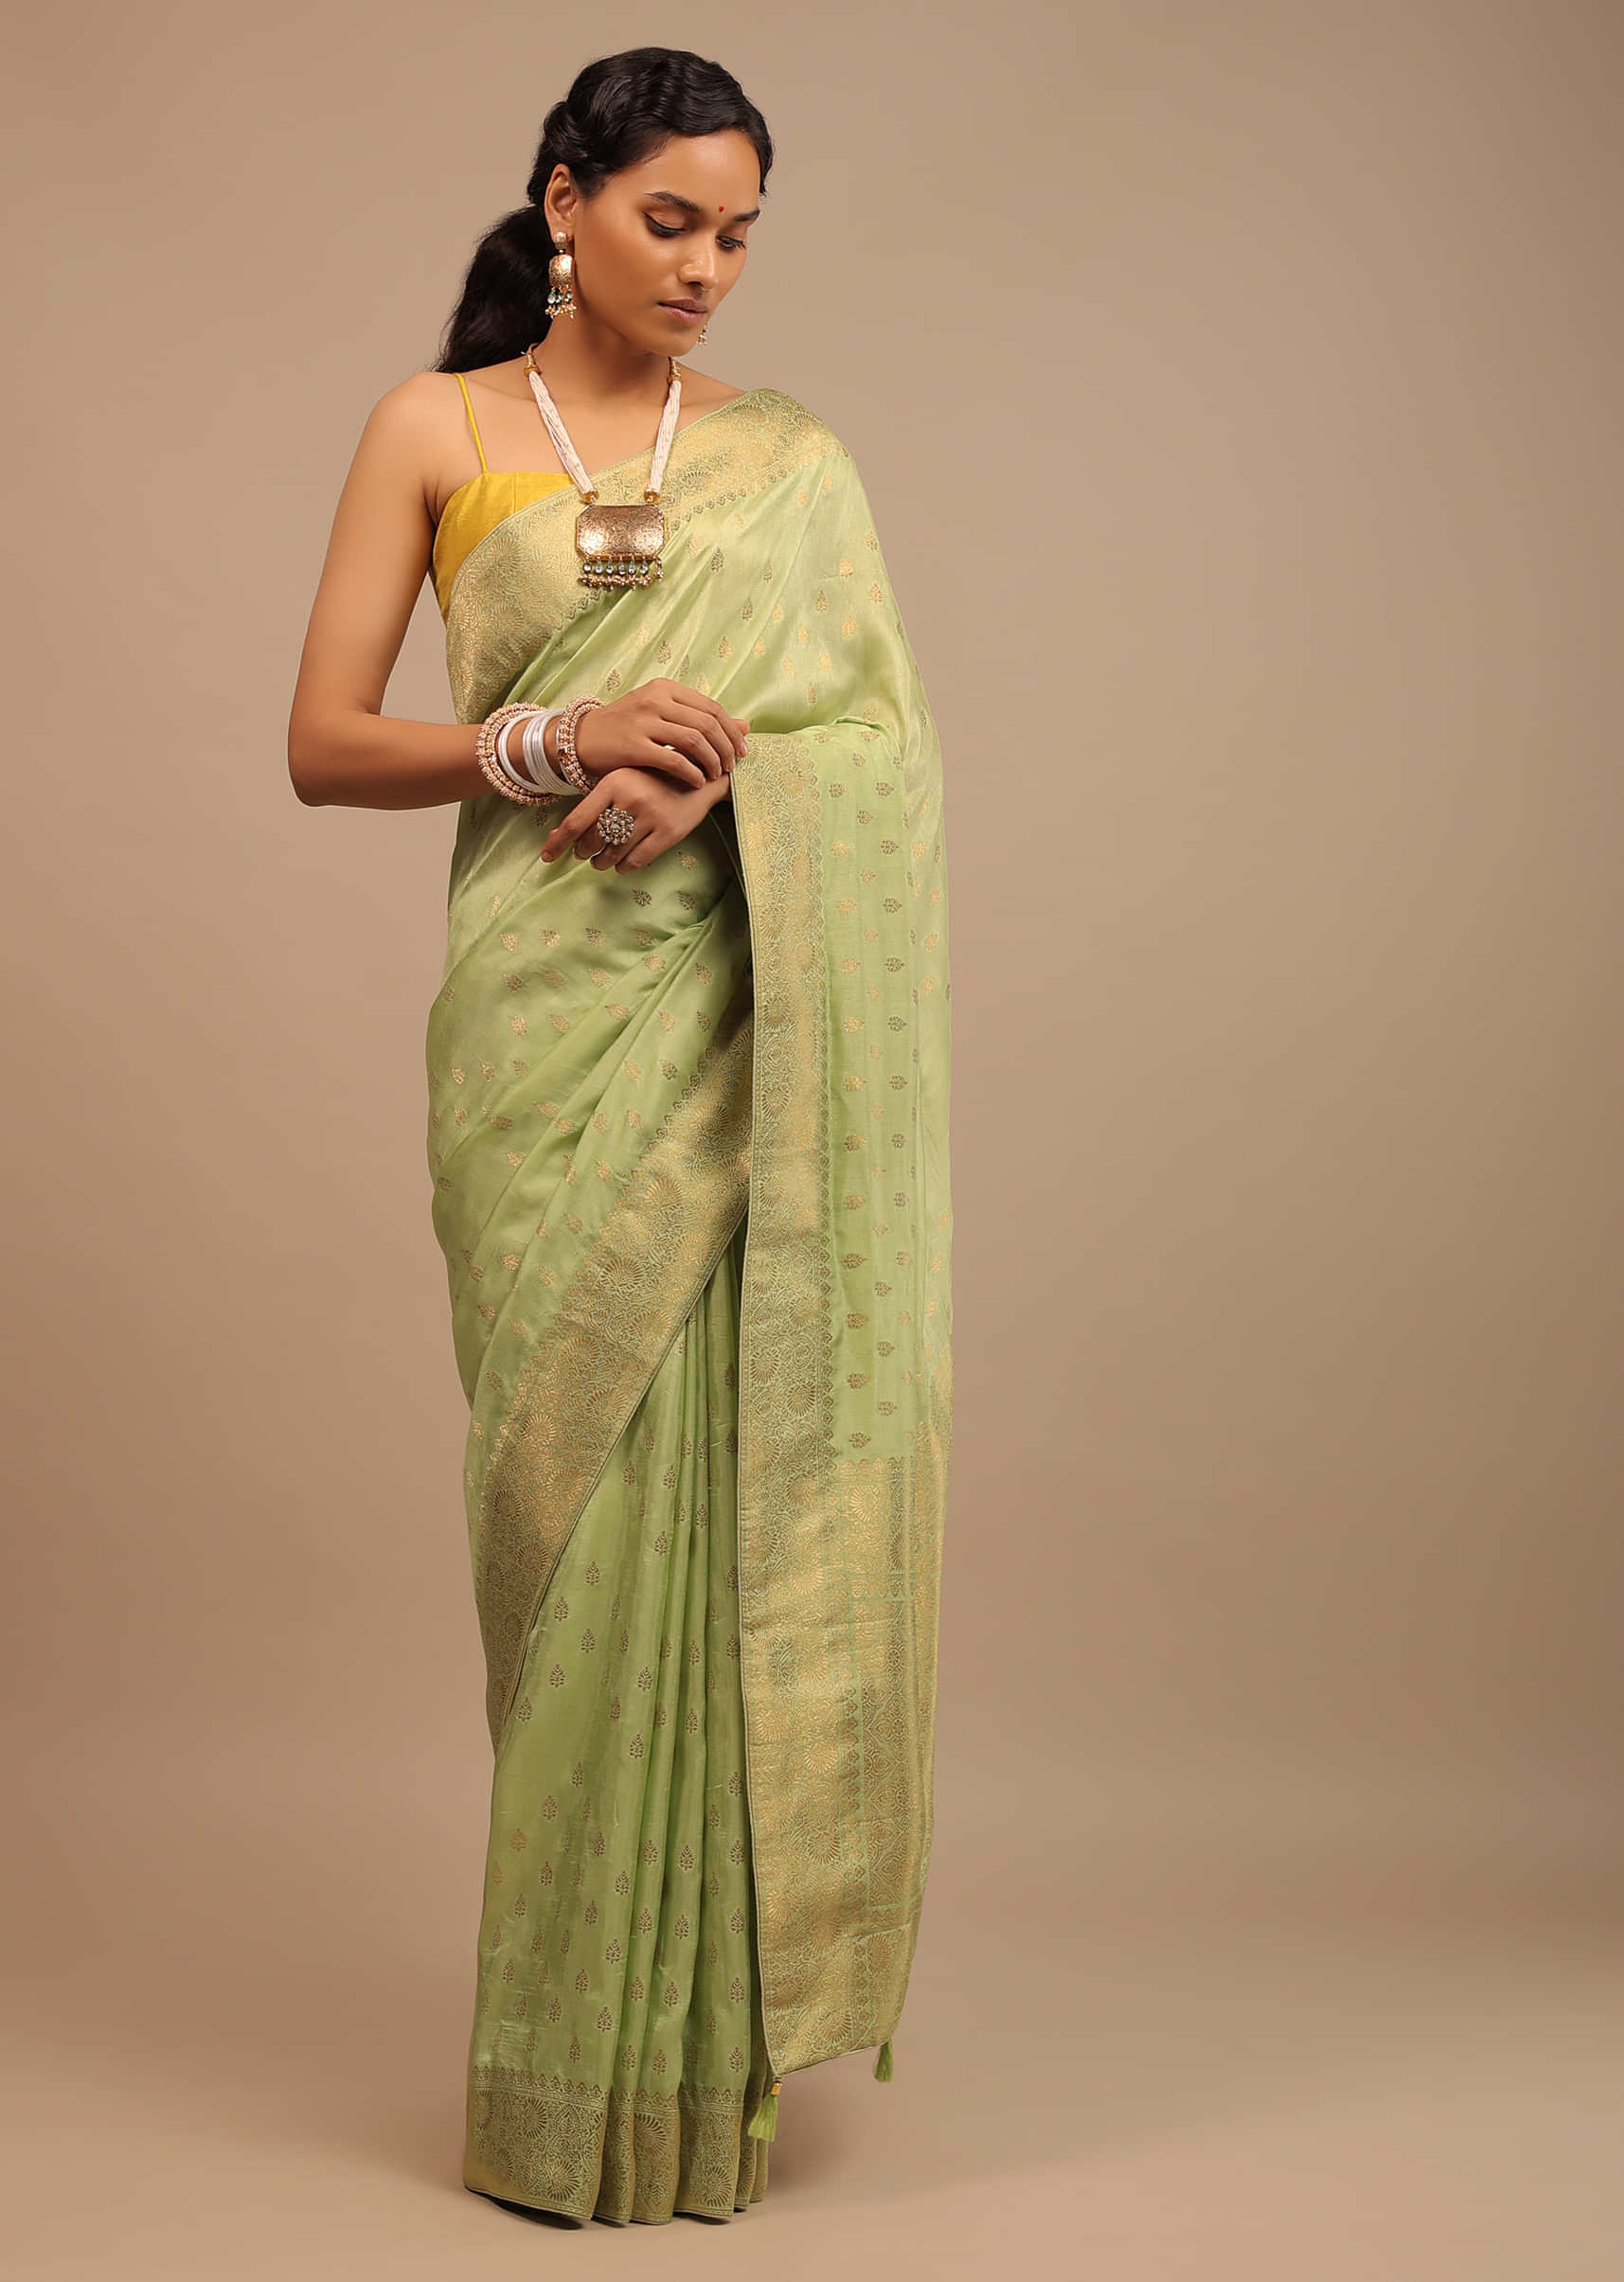 Sap Green Saree In Dola Silk With Woven Leaf Buttis And Moroccan Weave On The Pallu